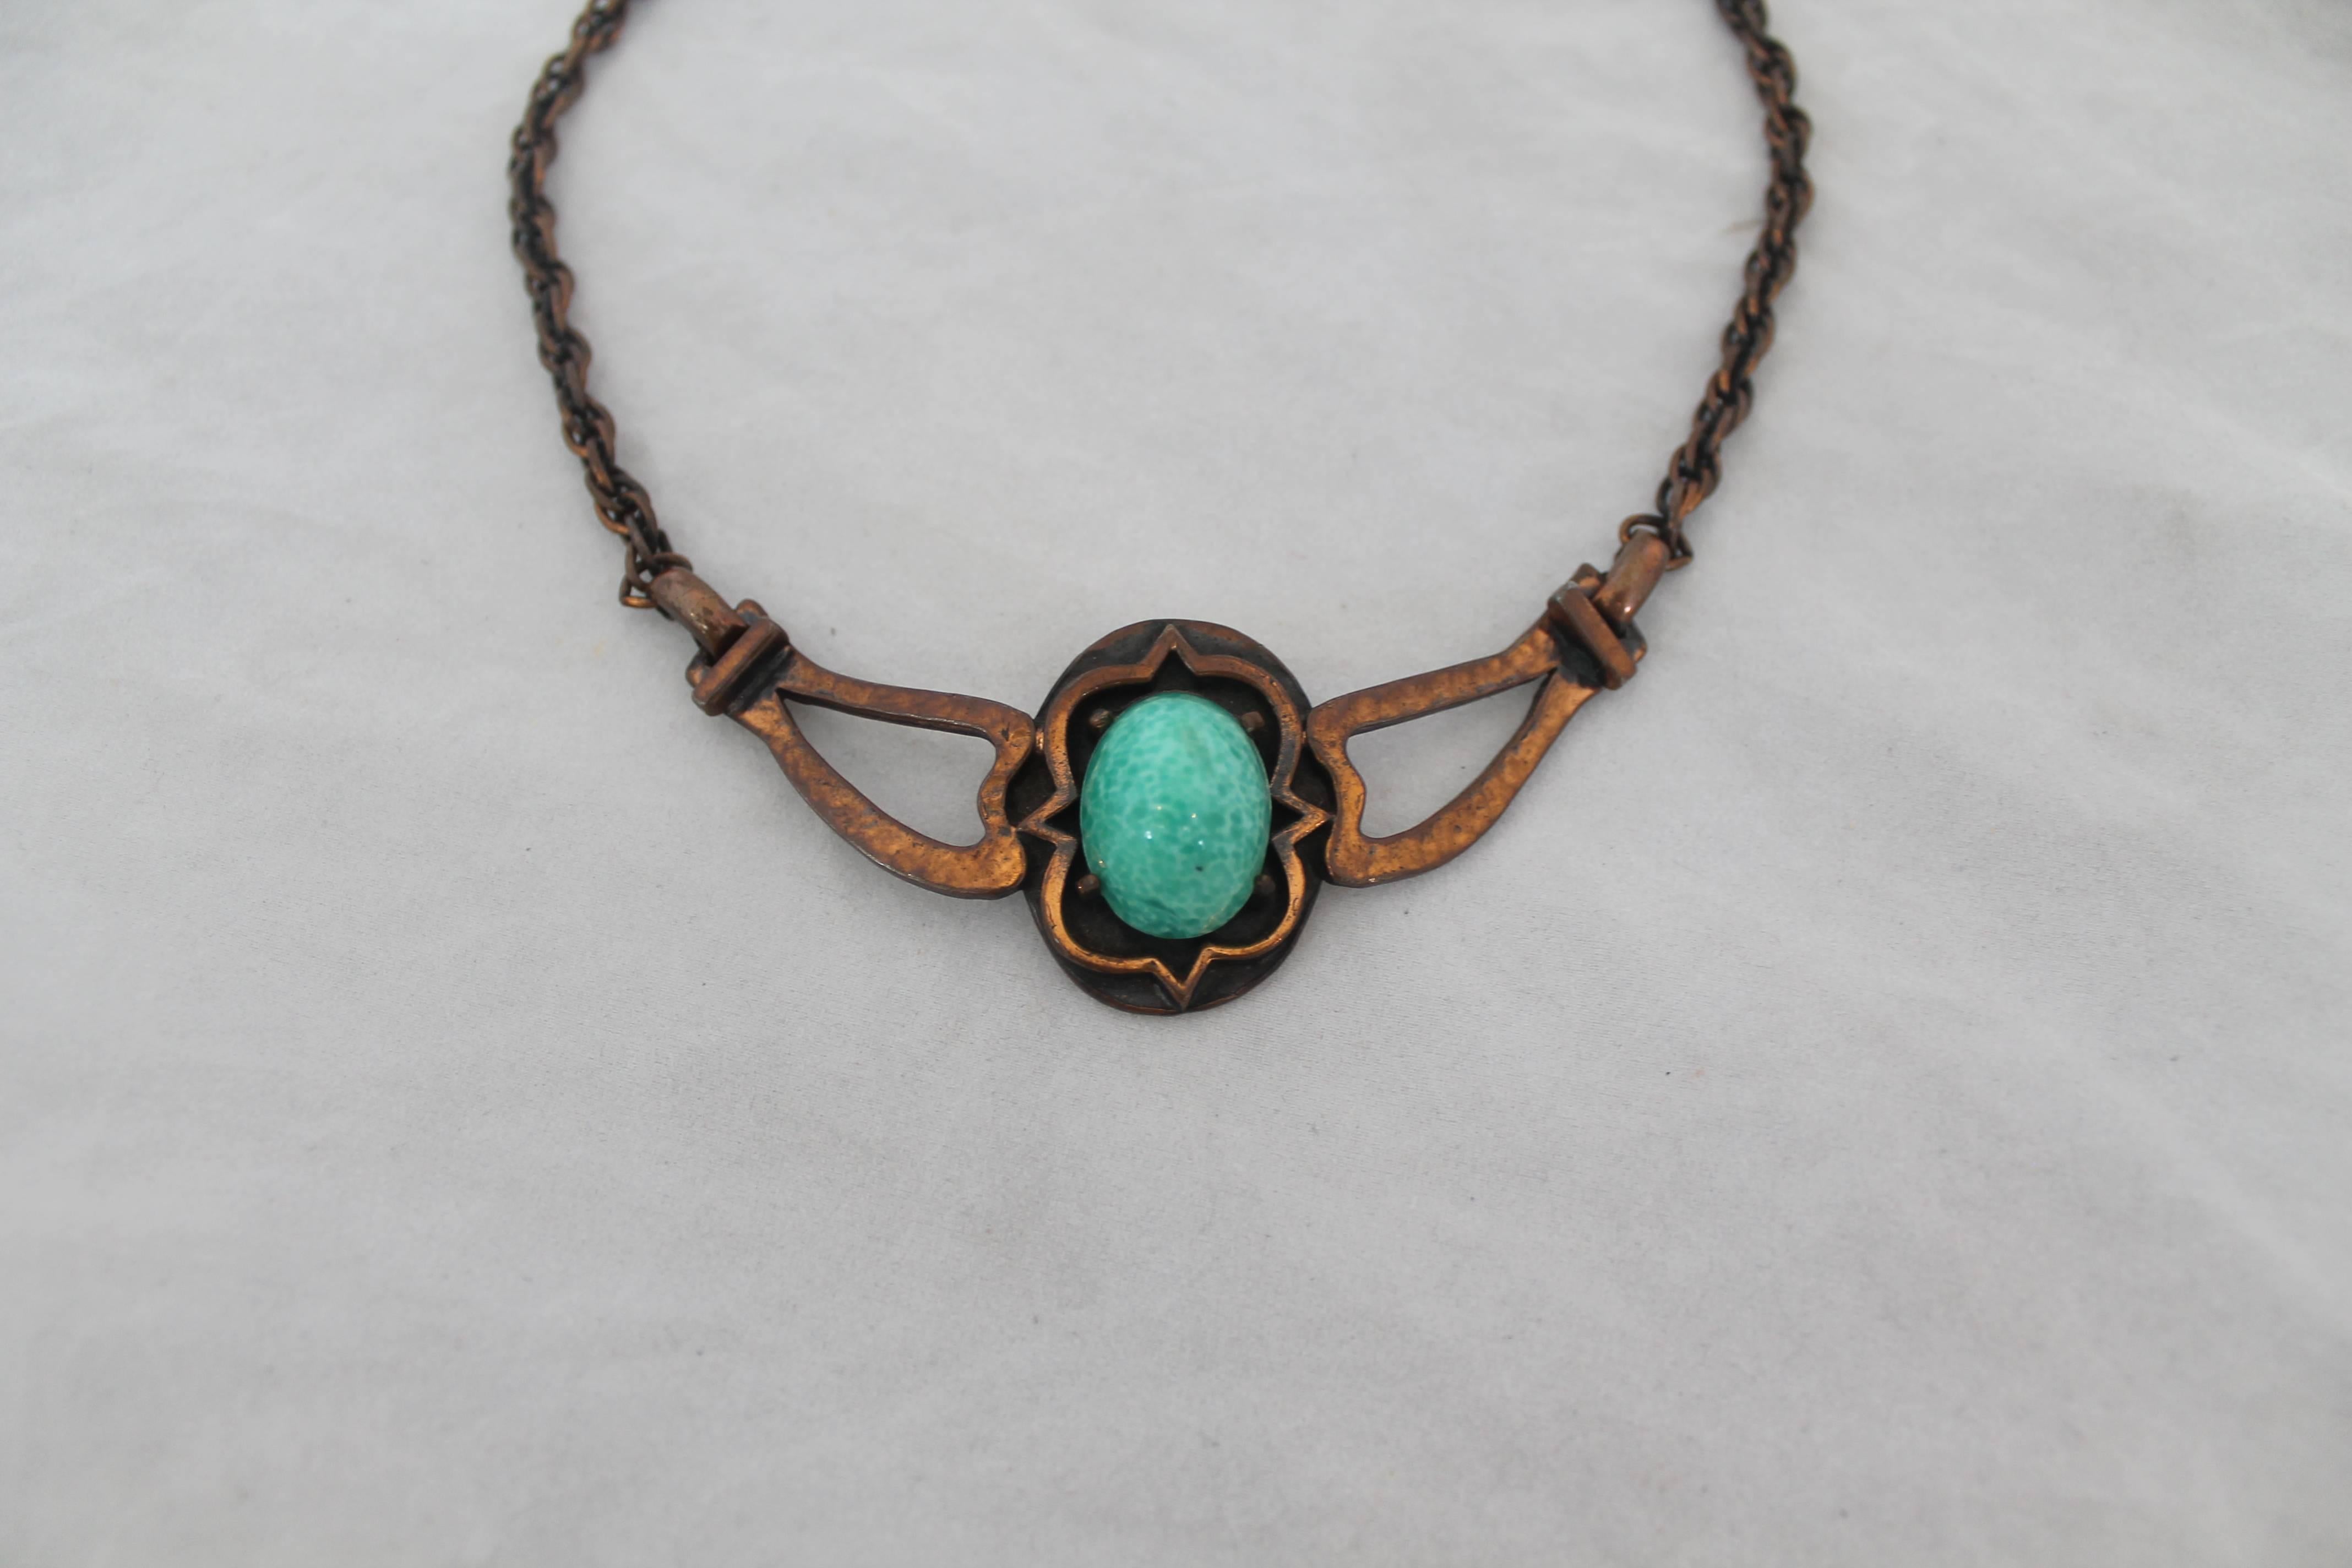 Rebajes Vintage Copper Necklace w/ Blue Stone - circa 1960's.  This necklace is in excellent vintage condition.  It features a hammered copper and a striking blue stone.  It is signed 